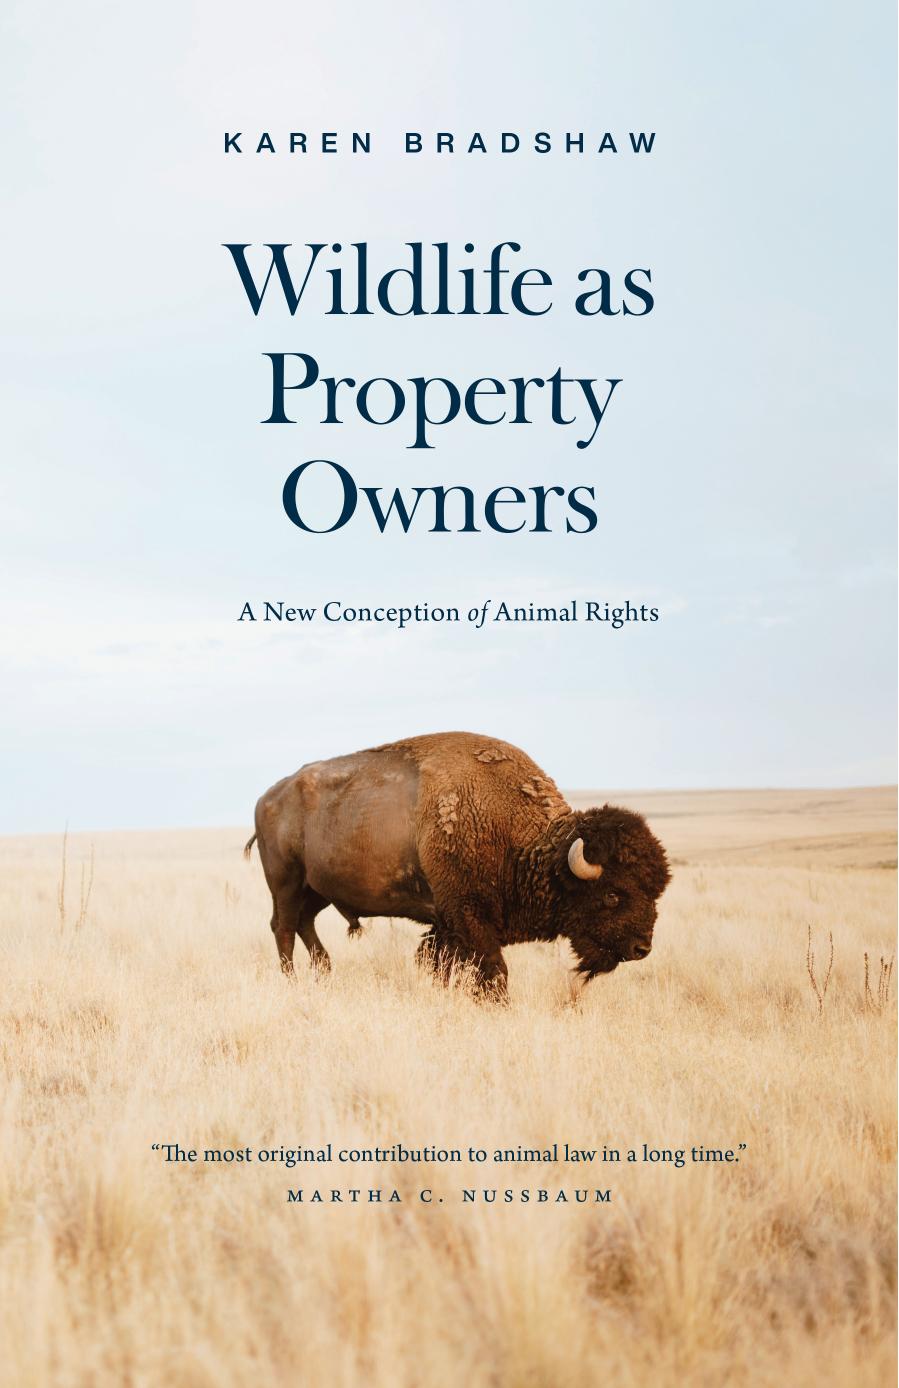 Wildlife as Property Owners: A New Conception of Animal Rights by Karen Bradshaw